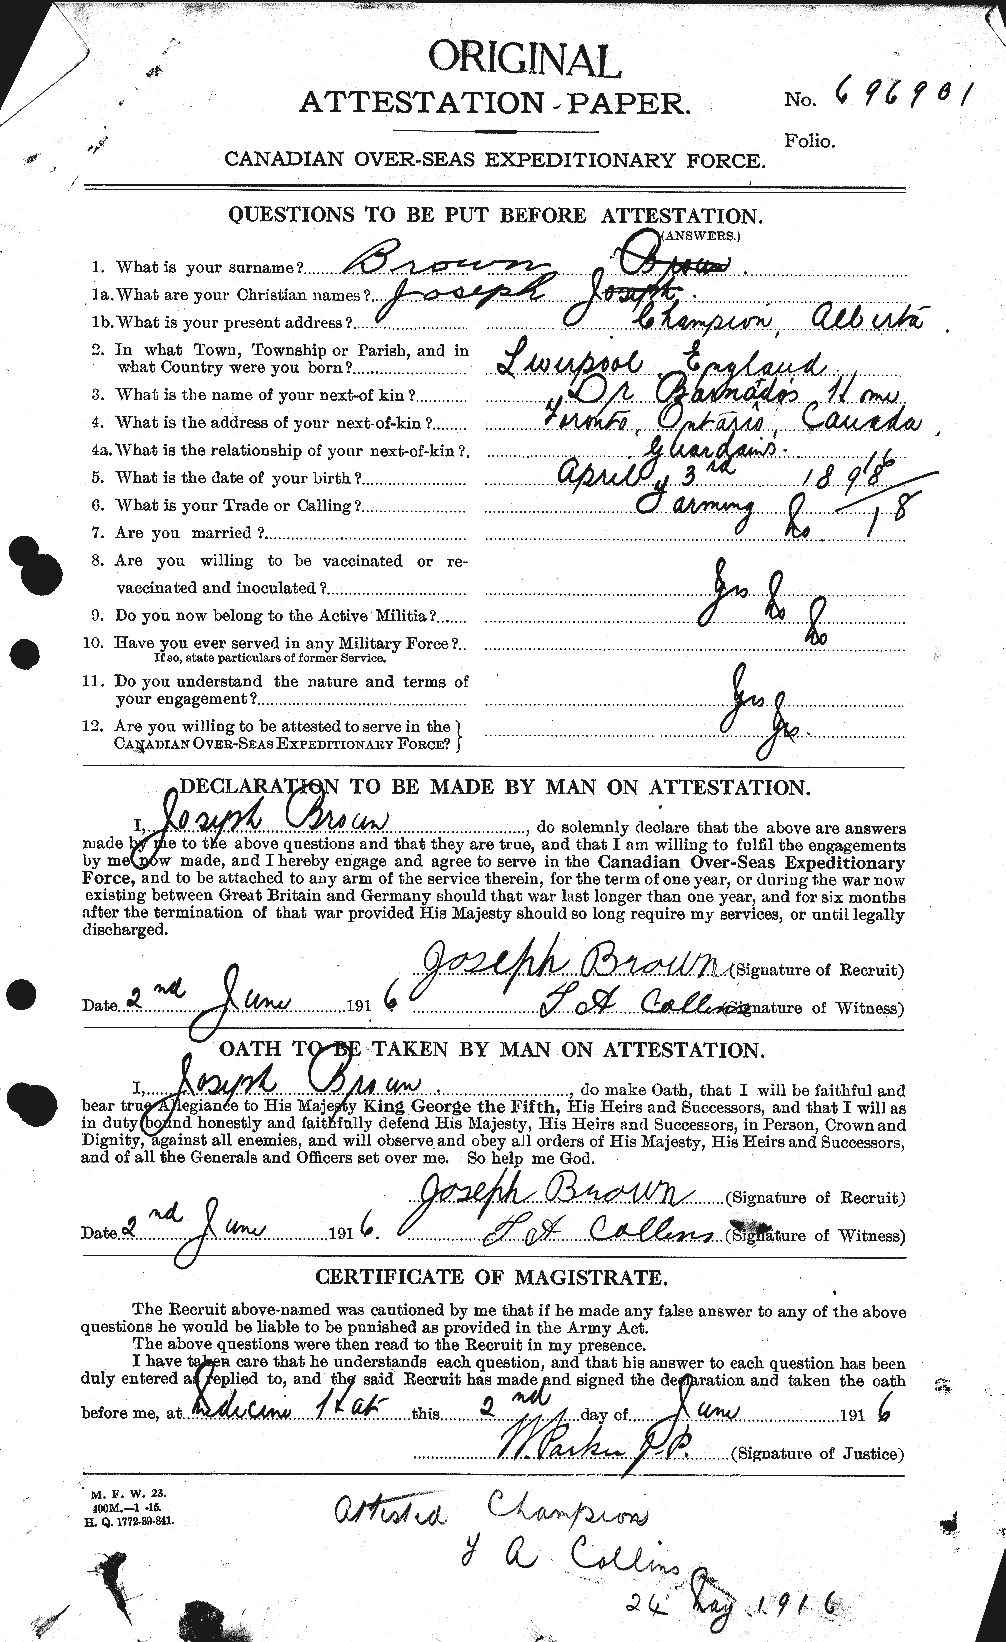 Personnel Records of the First World War - CEF 265945a